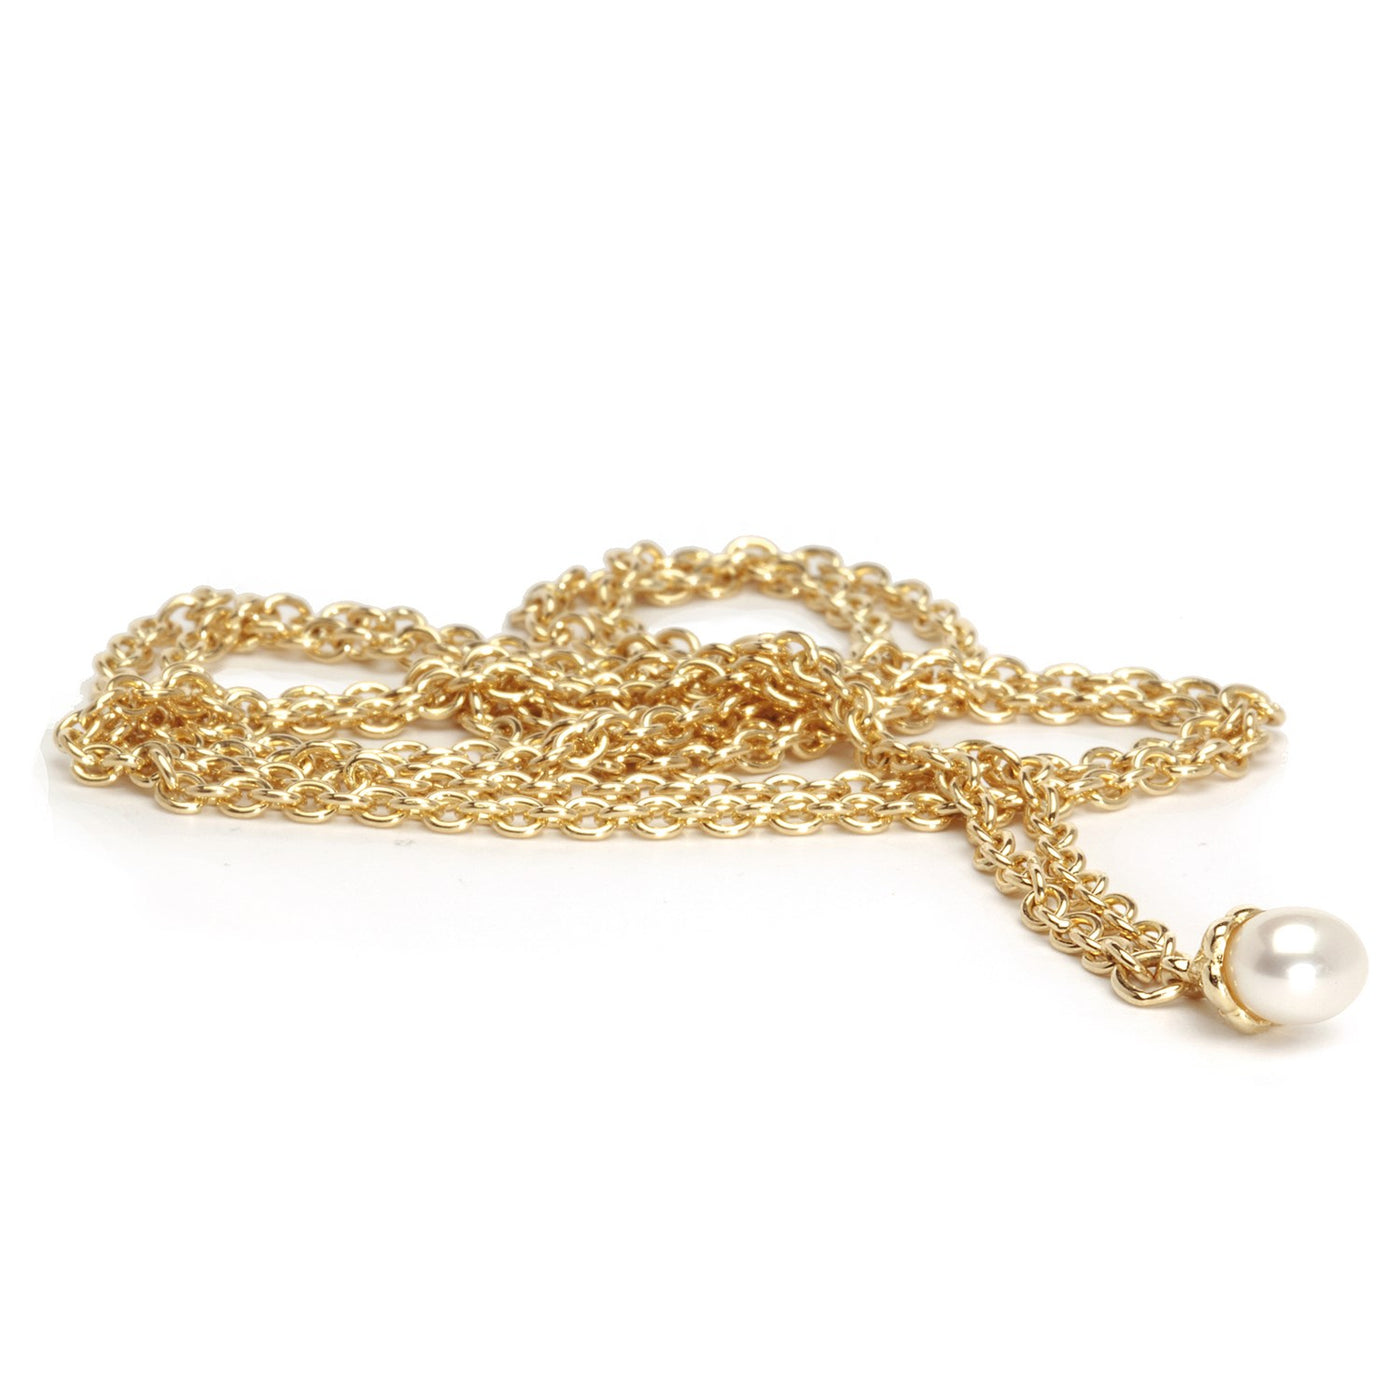 Gold Fantasy Necklace with Pearl, featuring a delicate chain made of 18 karat gold and a stunning pearl pendant, adding a touch sophistication to any outfit.